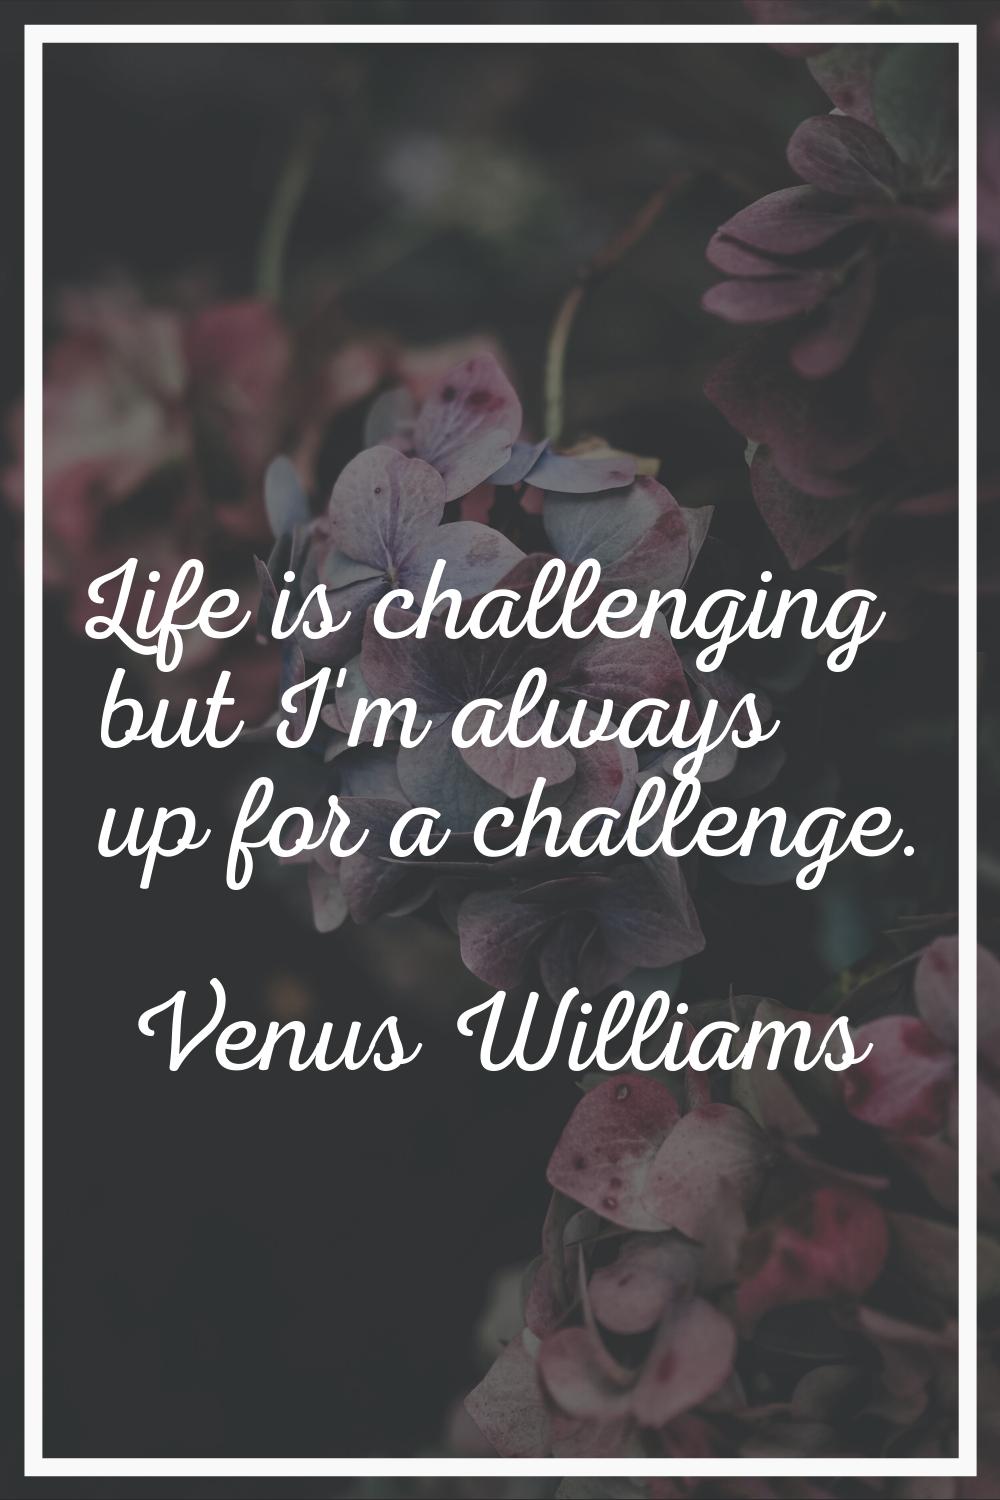 Life is challenging but I'm always up for a challenge.